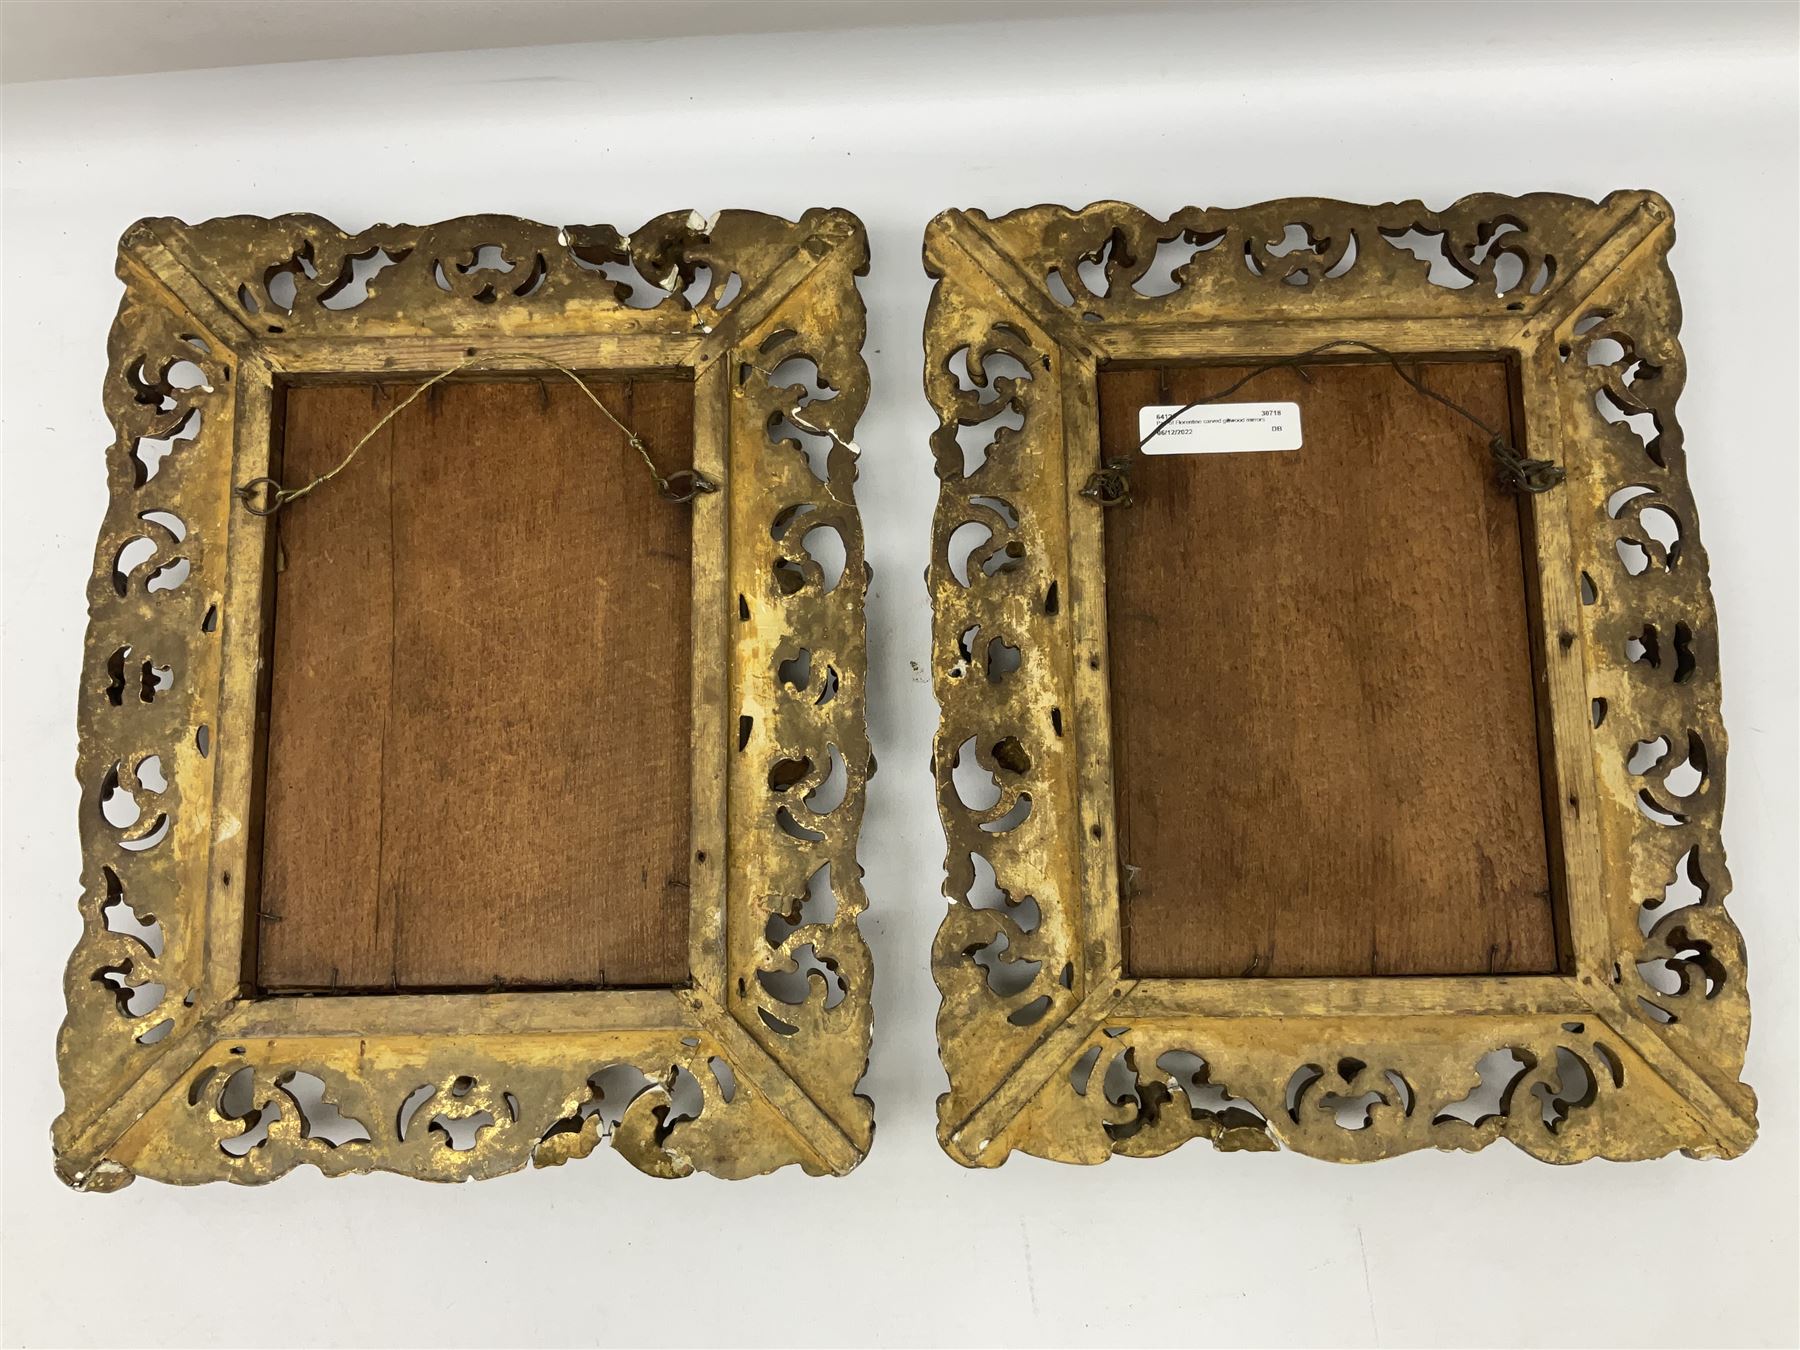 Pair of Florentine carved giltwood mirrors - Image 11 of 11